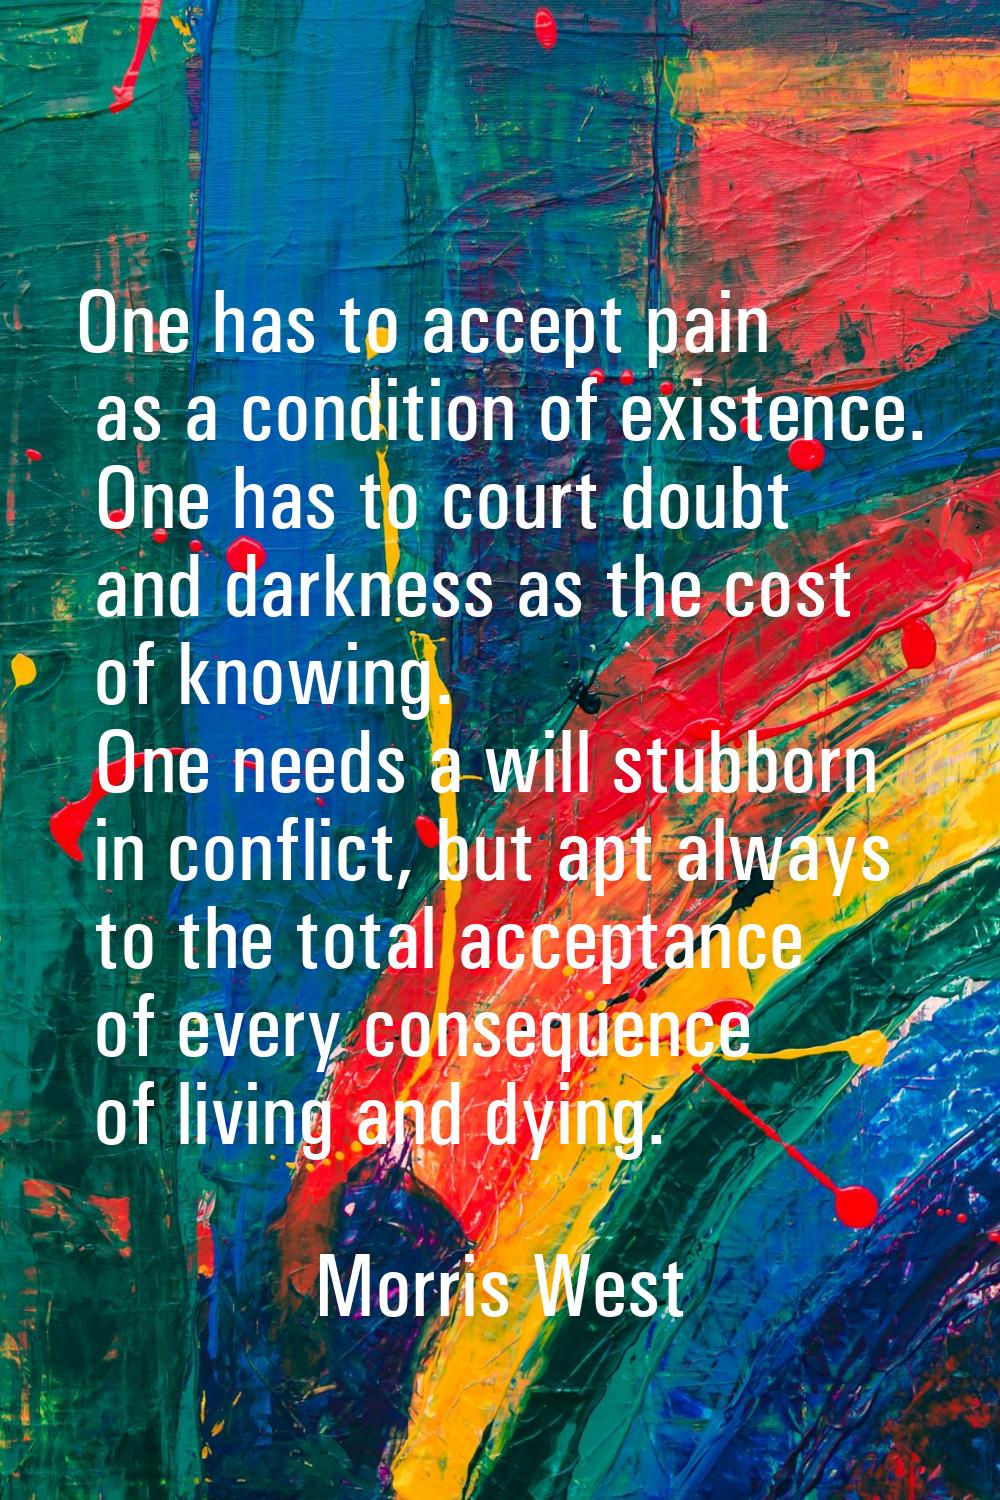 One has to accept pain as a condition of existence. One has to court doubt and darkness as the cost